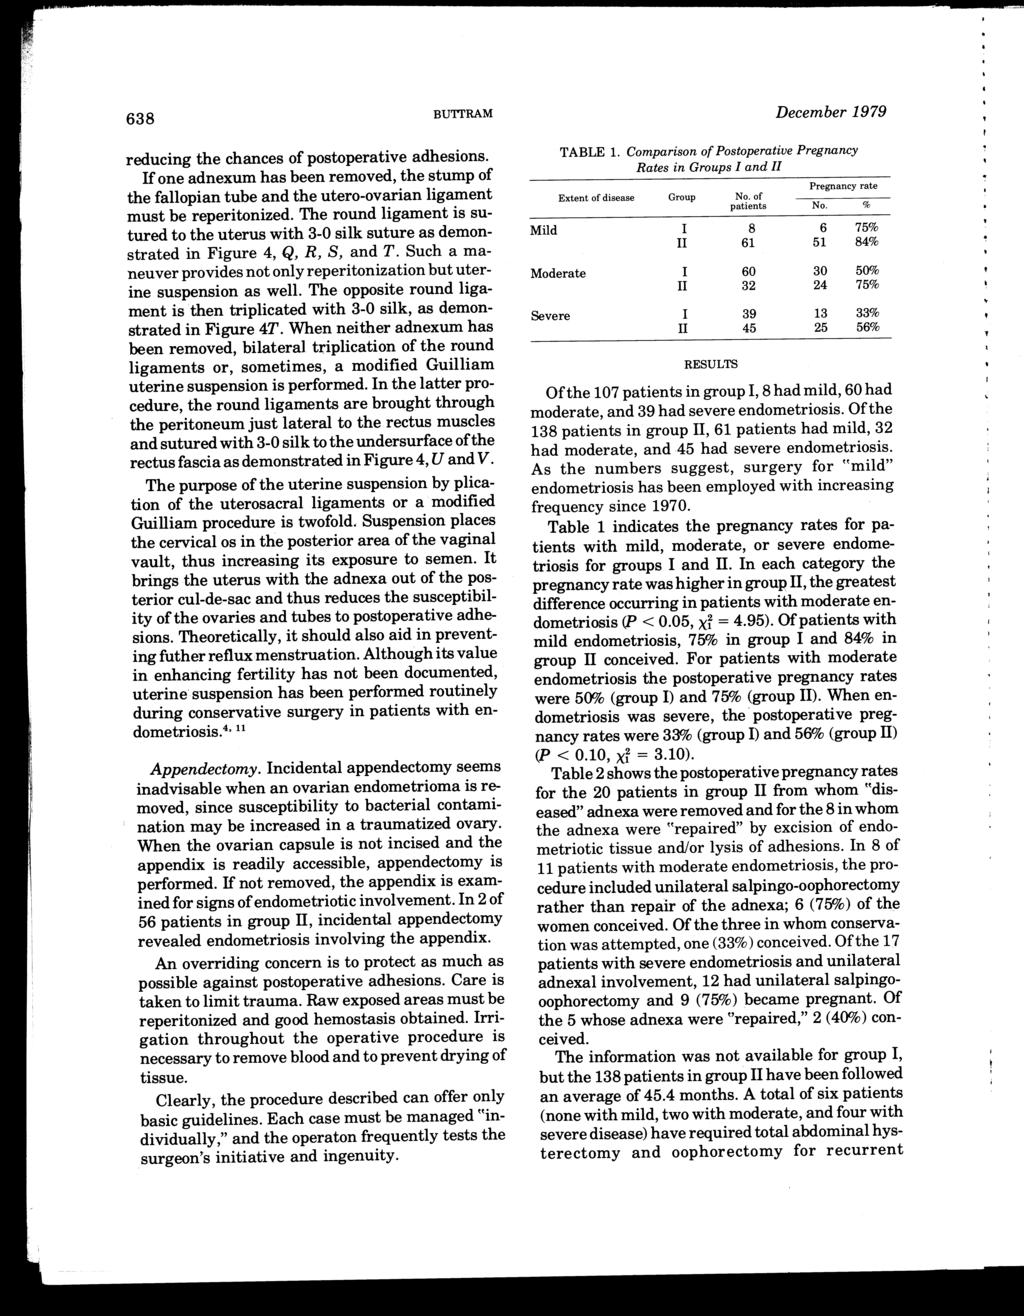 638 BU'ITRAM December 1979 red.ucing the chances of postoperative adhesions. If one adnexum has been removed, the stump of the fallopian tube and the utero-ovarian ligament must be reperitonized.